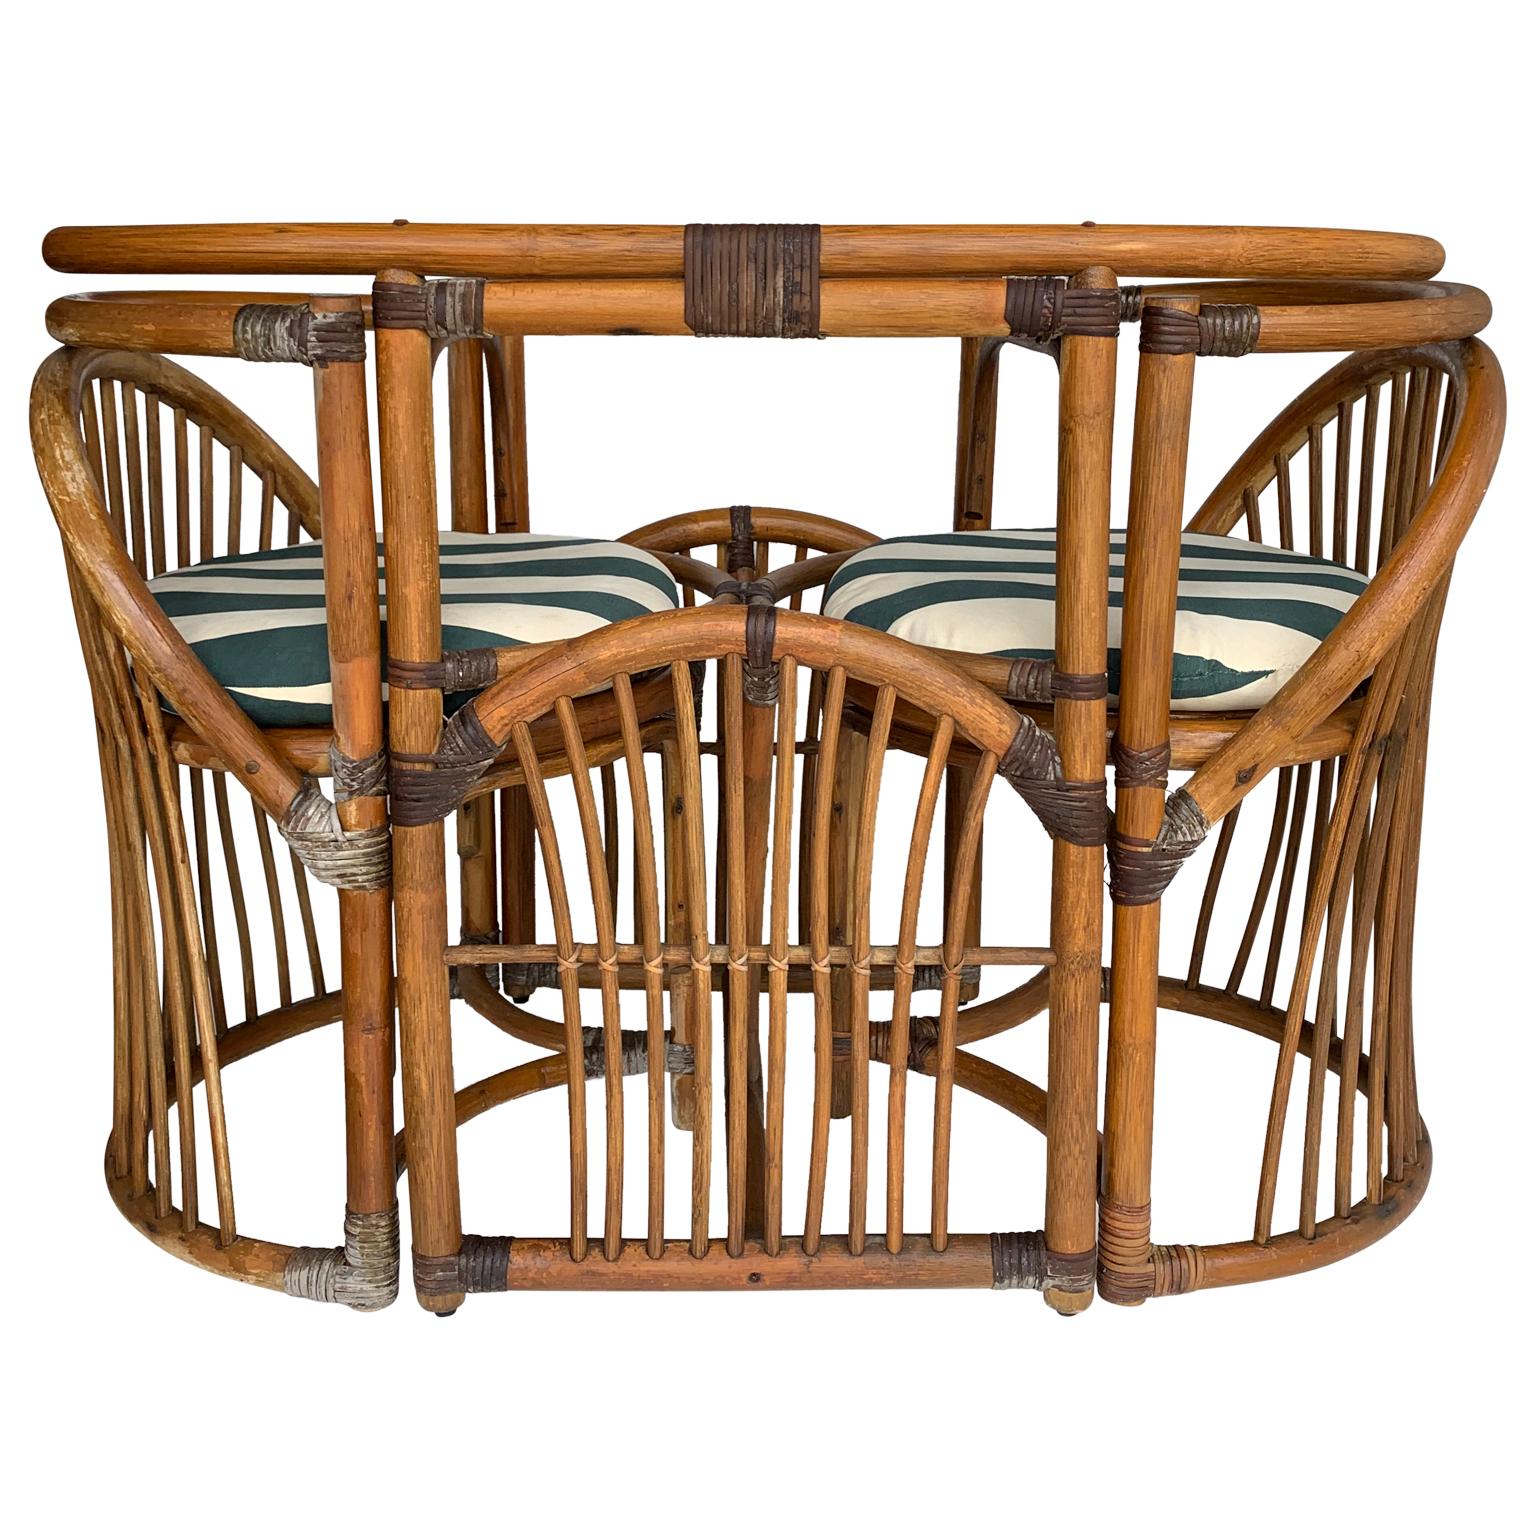 Patio dining table and two chairs, made in tiger wood bamboo rattan

Glass table-top ships separately, additional $225 charge applies and is offered in two different versions:
A: 24